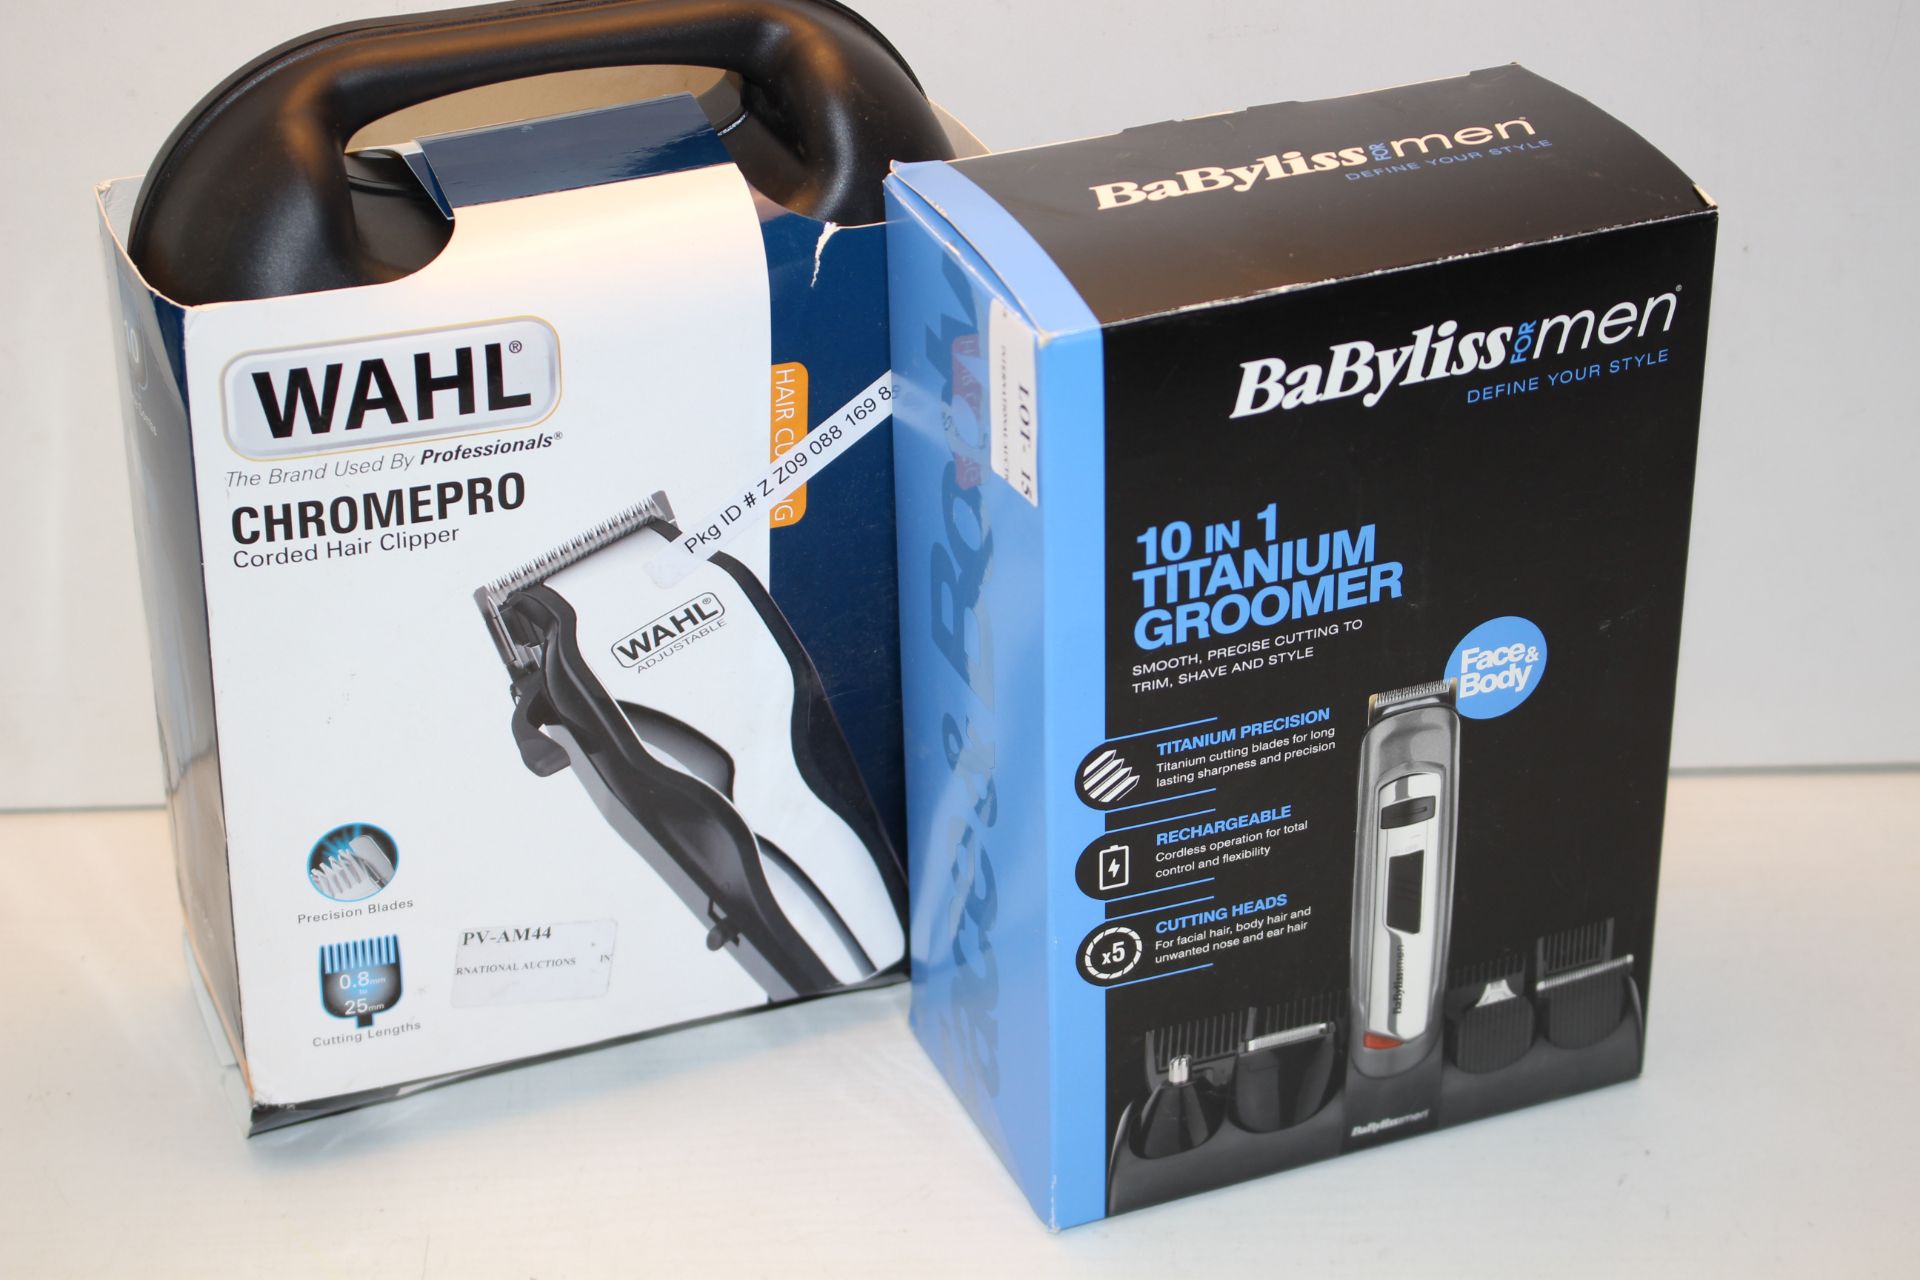 2X BOXED ASSORTED ITEMS TO INCLUDE WAHL CHROMEPRO CORDED HAIR CLIPPER & BABYLISS FOR MEN 10-IN-1